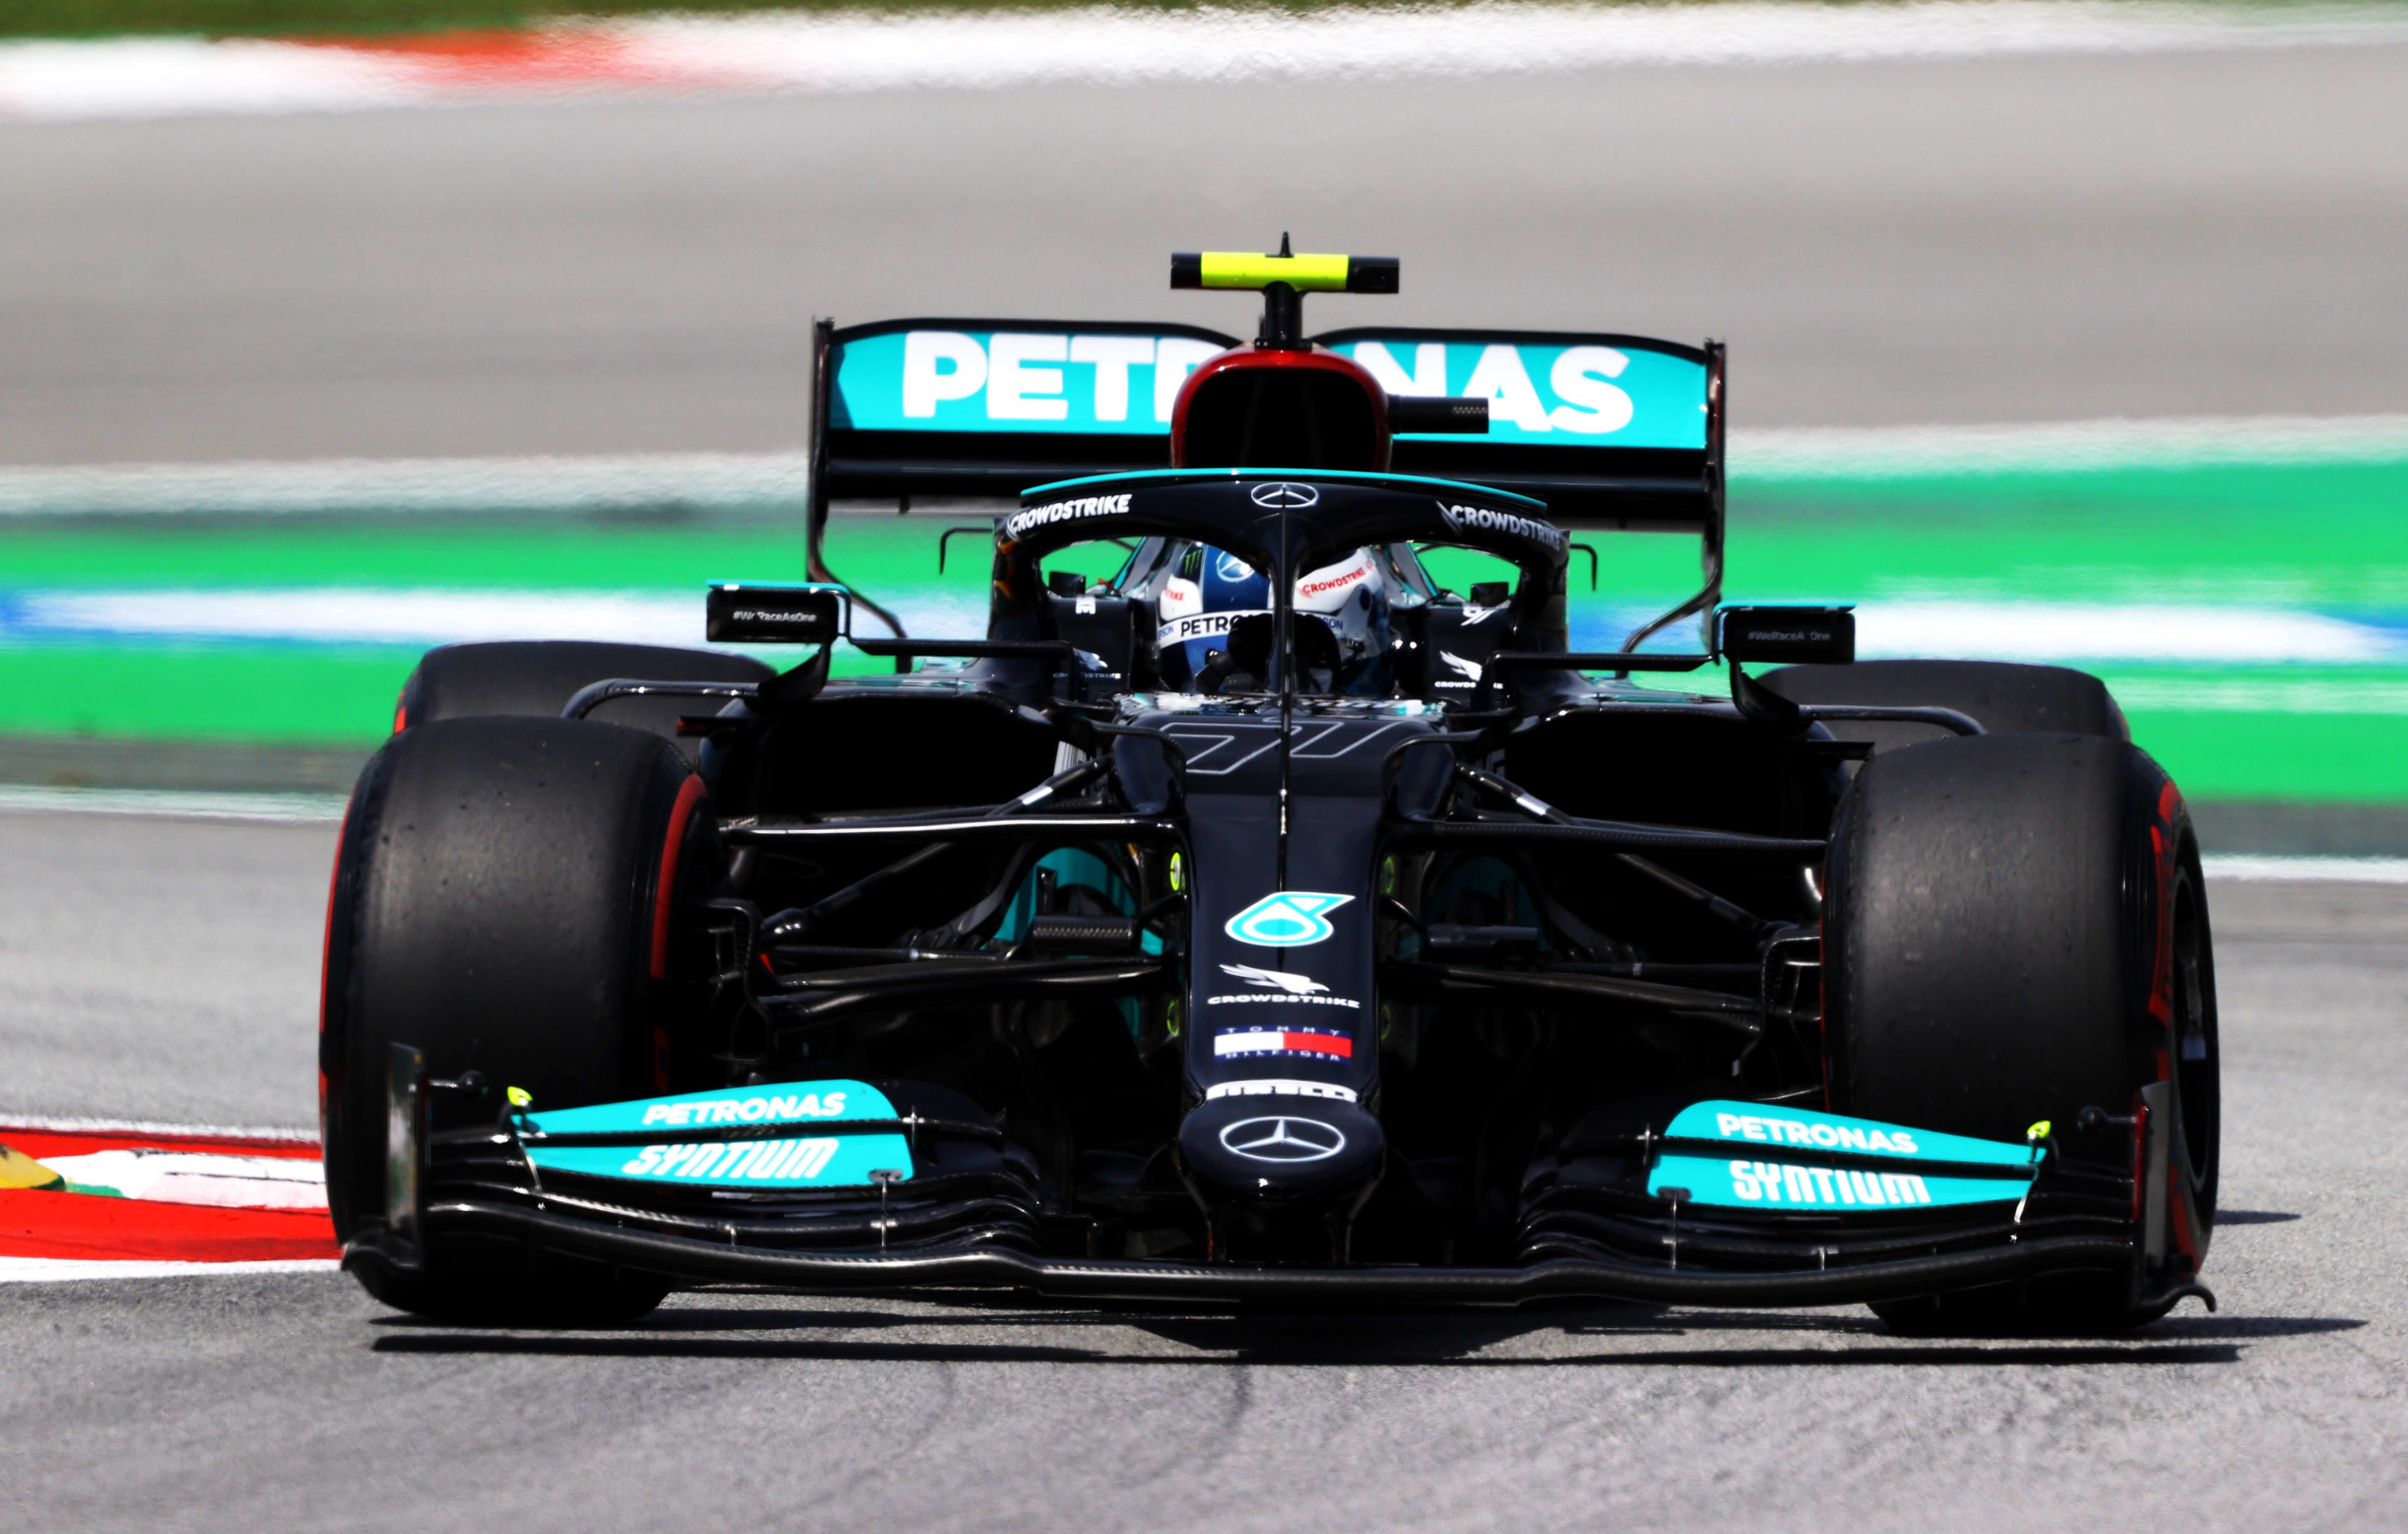 2021 Spanish Grand Prix FP1 report and highlights Bottas tops first practice in Spain for Mercedes ahead of Verstappen and Hamilton Formula 1®